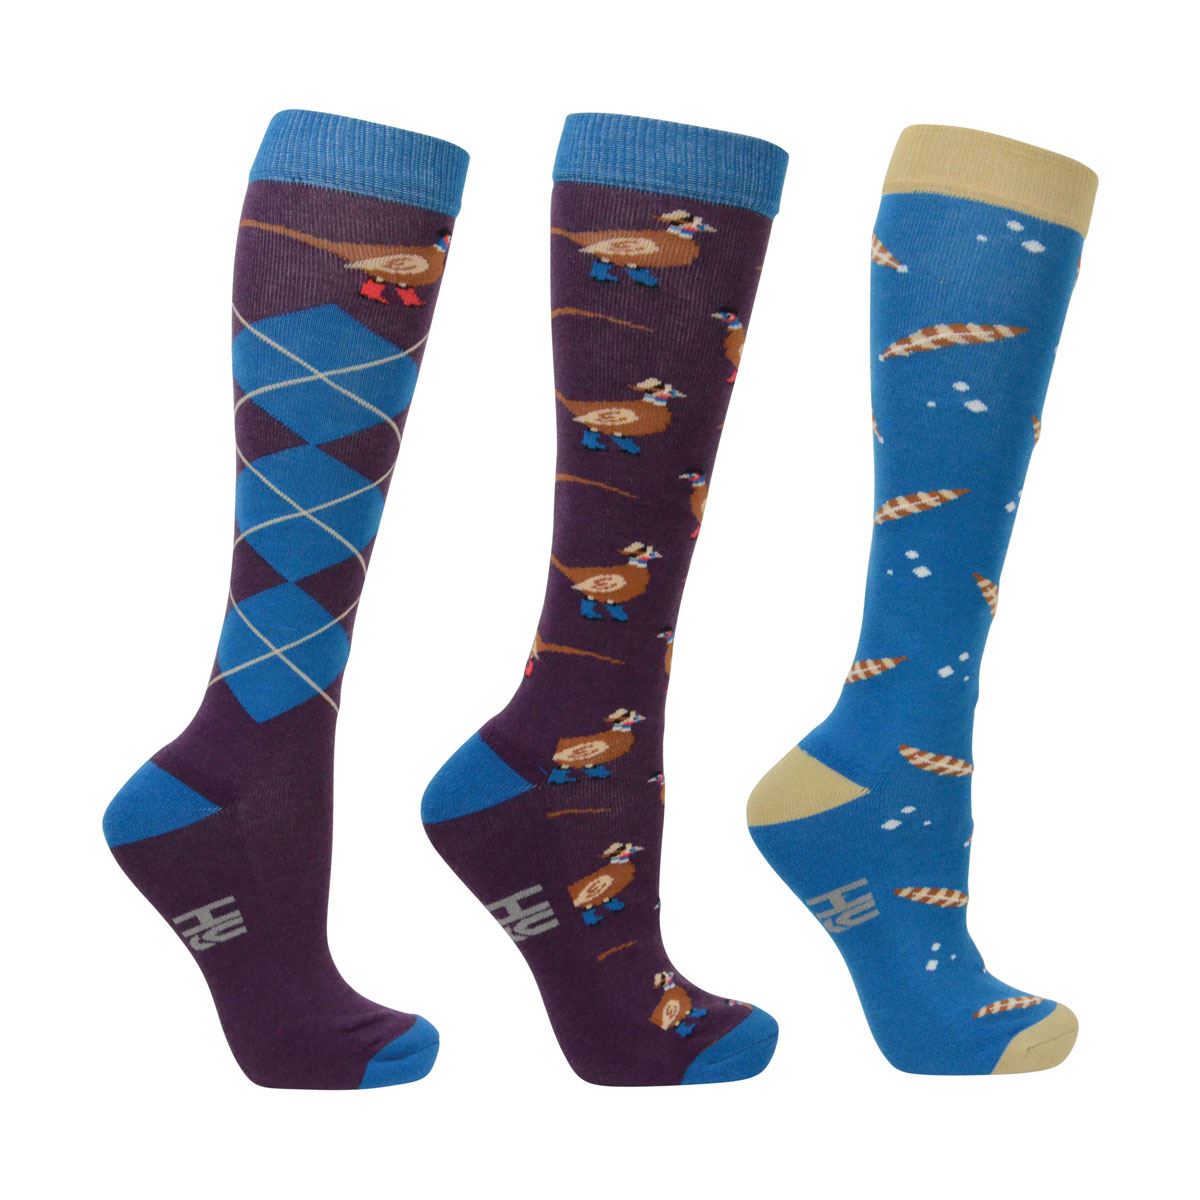 Hy Equestrian Patrick the Pheasant Socks (Pack of 3) - Just Horse Riders